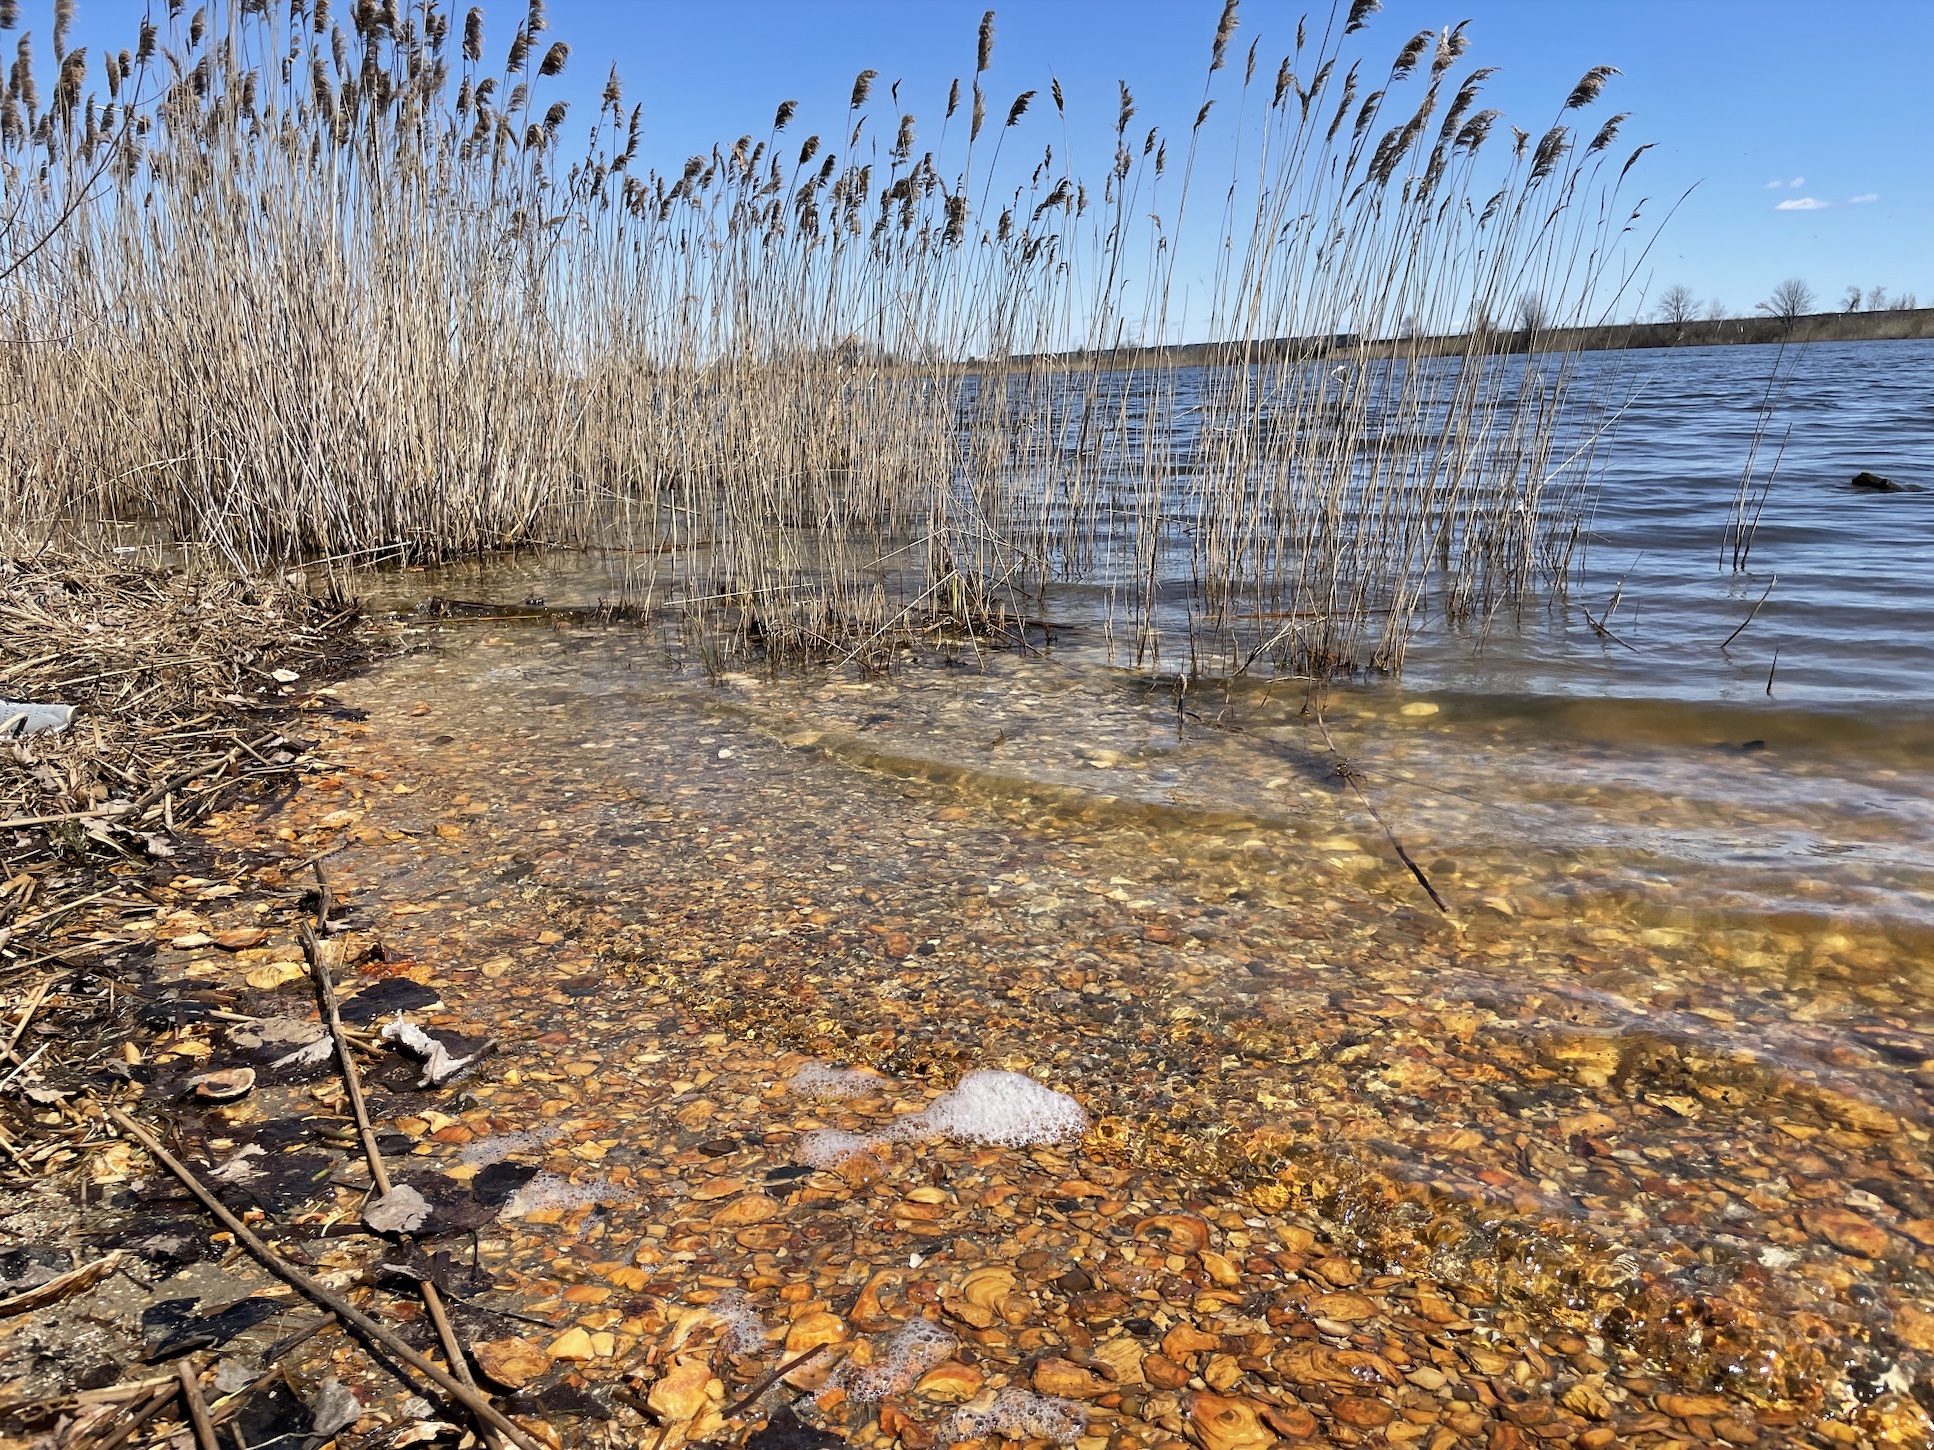 A shoreline of empty mollusk shells descends into a pond. Grass in the background also extends into the pond.